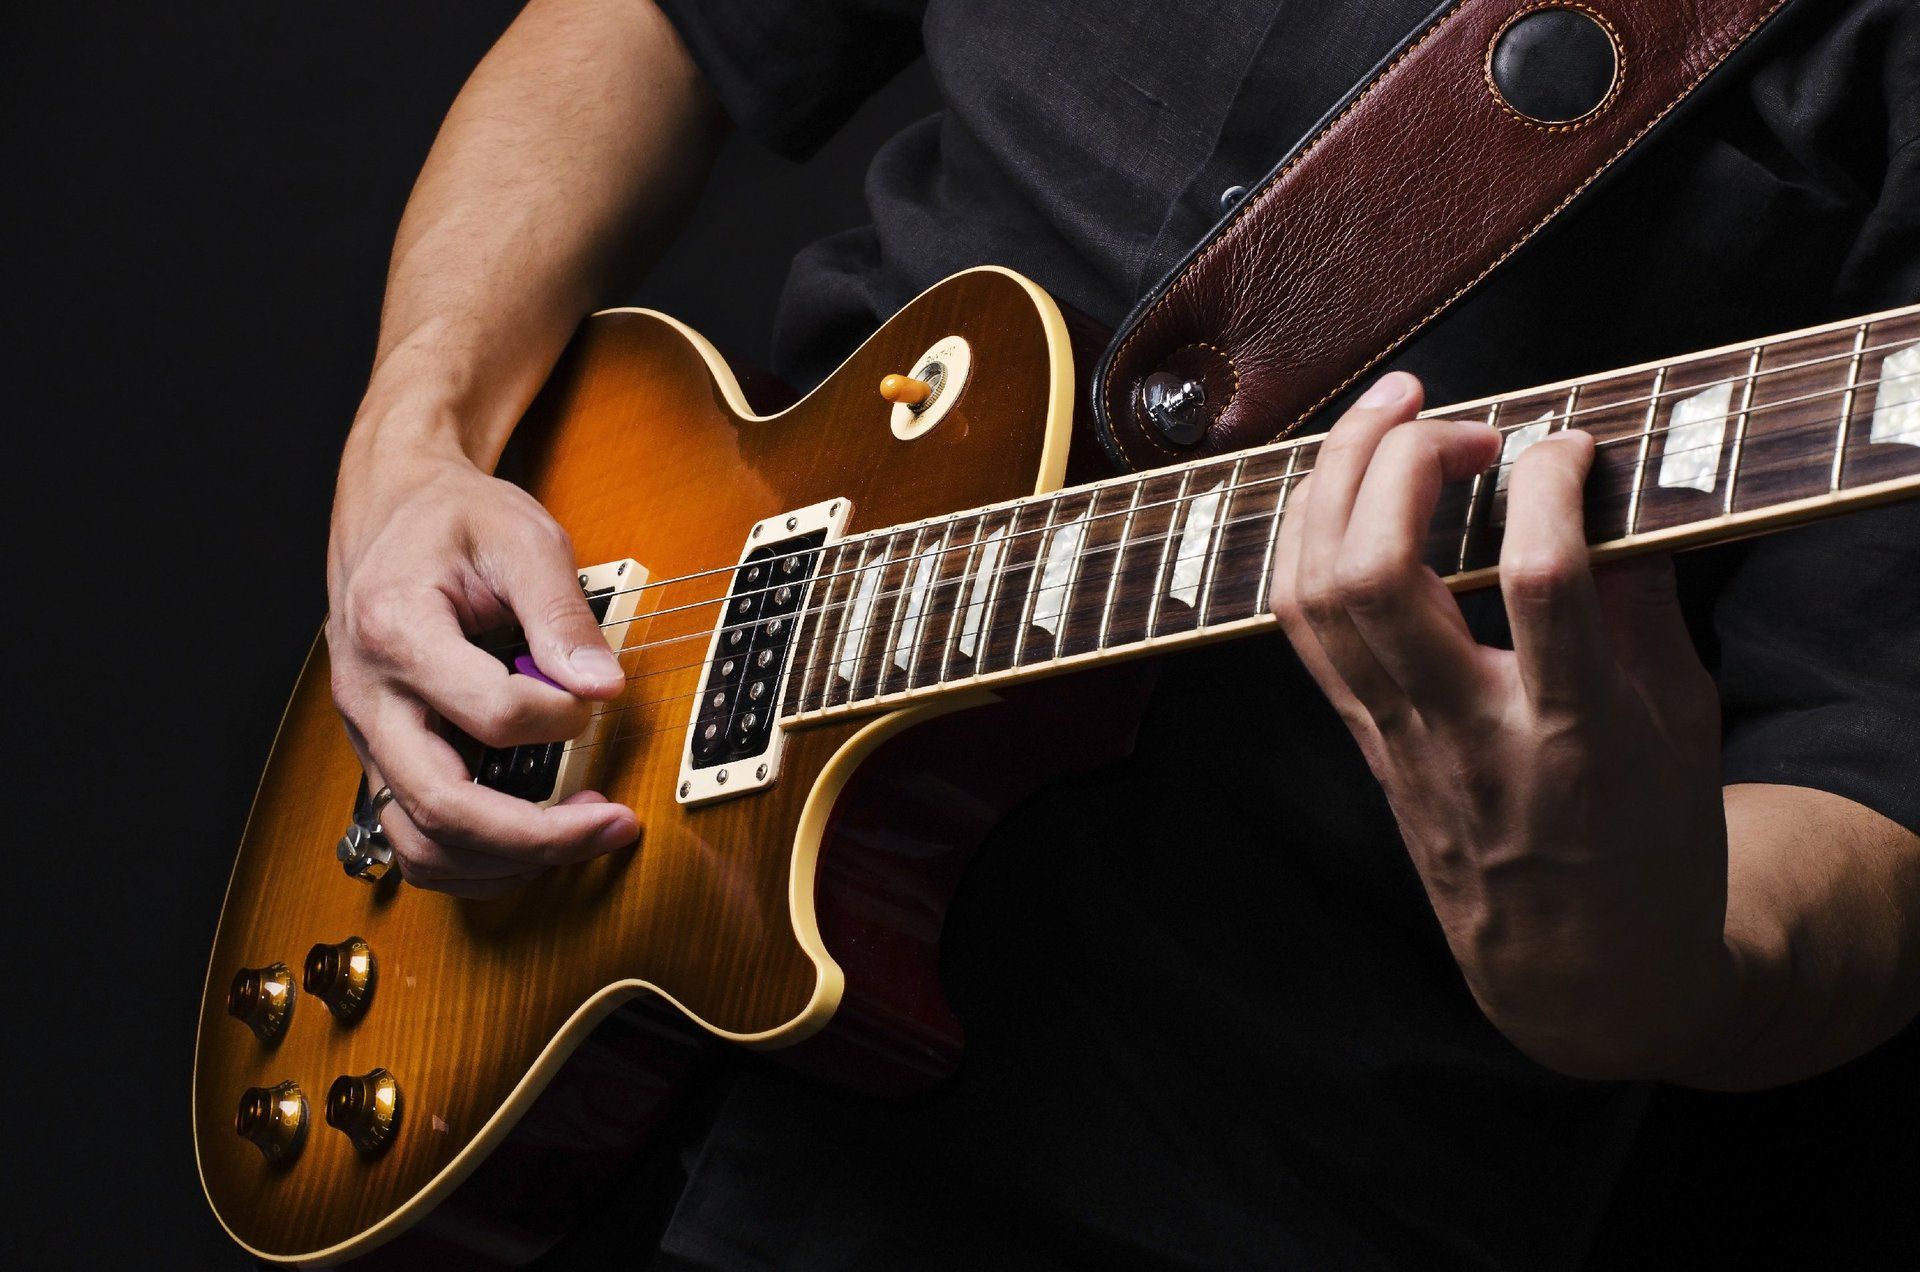 14 Tips To Sound Like A Guitar Pro